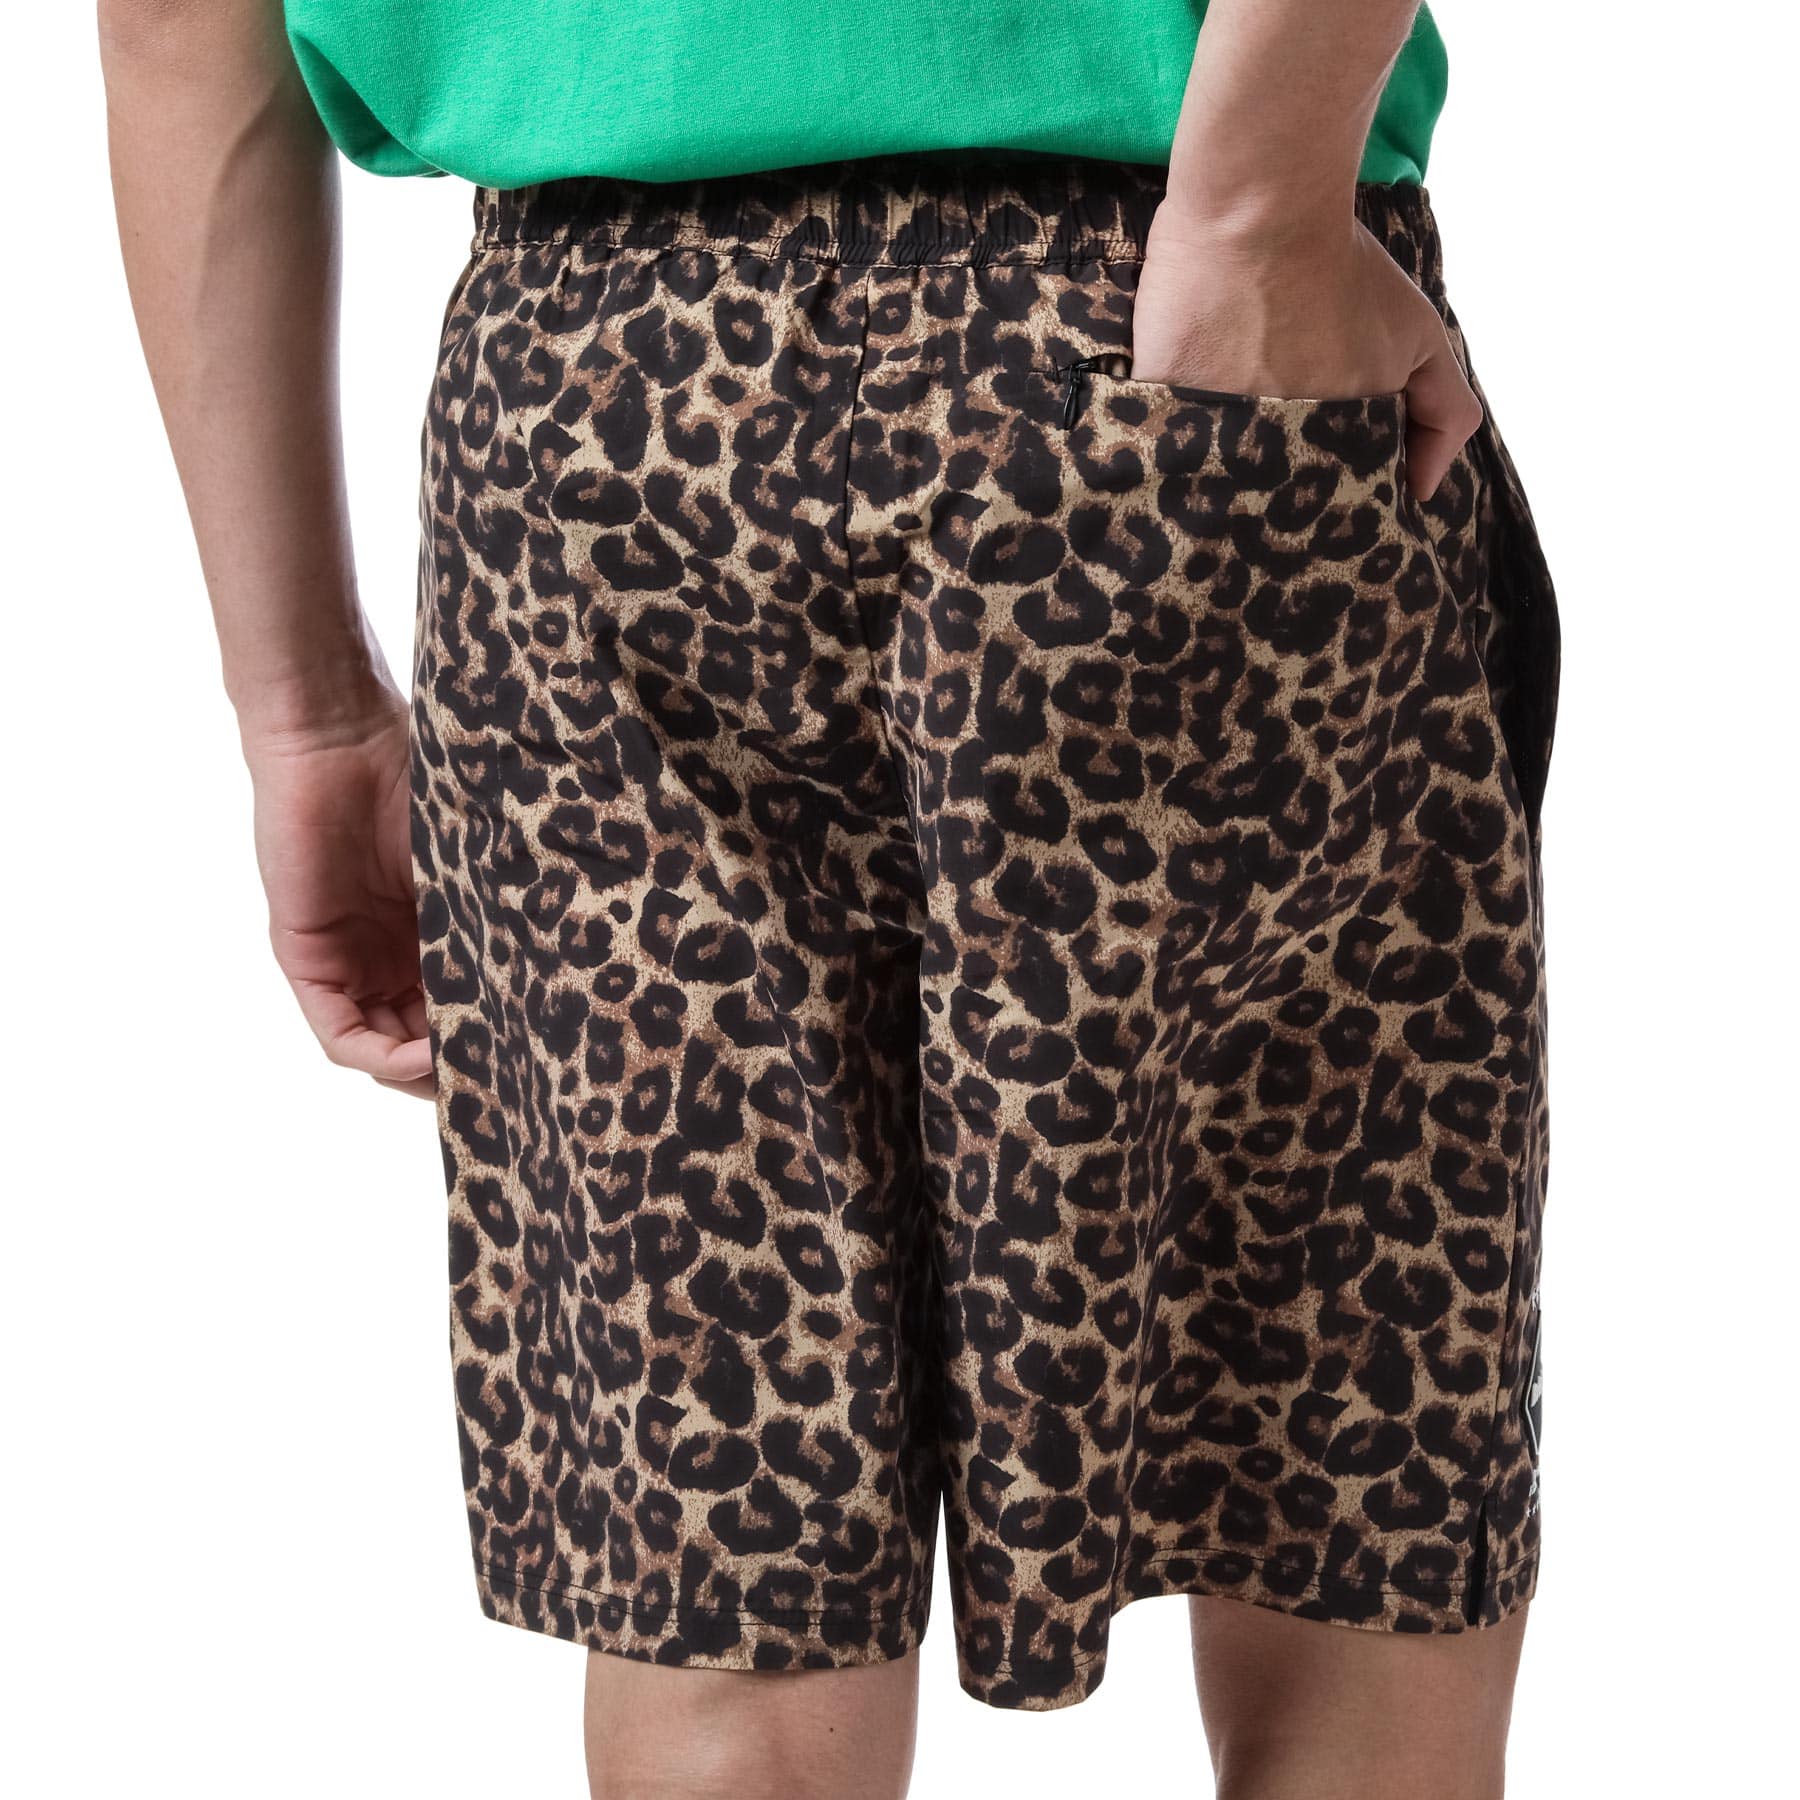 FCRB 22SS PRACTICE SHORTS BROWN LEOPARD | smmedia.co.in